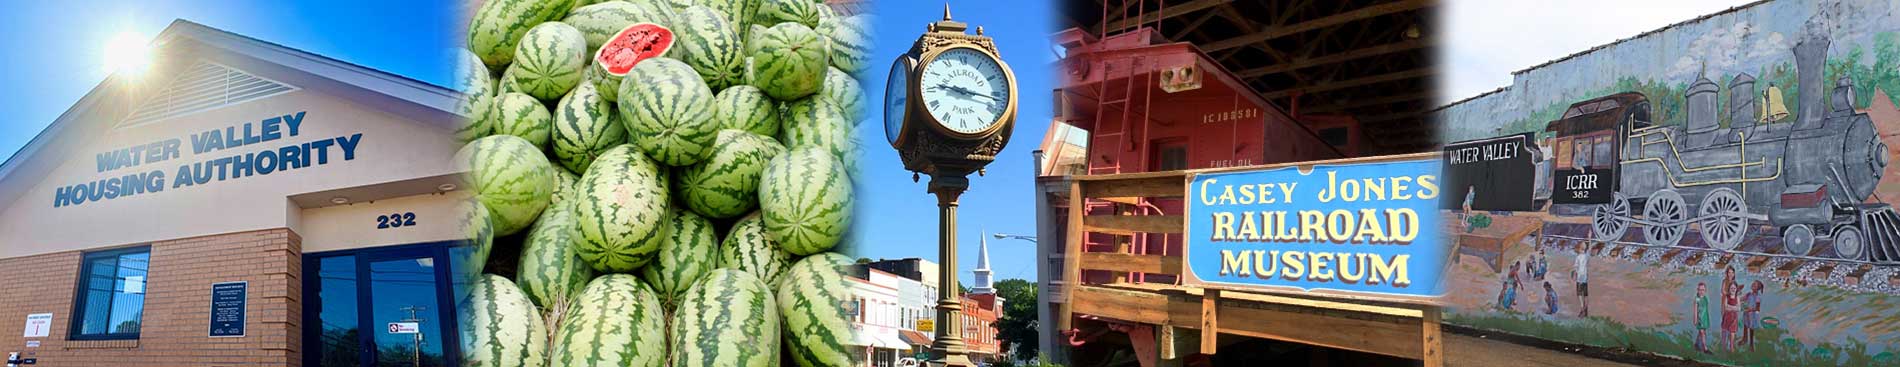 Collage of photos showing Water Valley Housing Authority Office Building, Watermelons, a clock near a railroad sign and a train mural